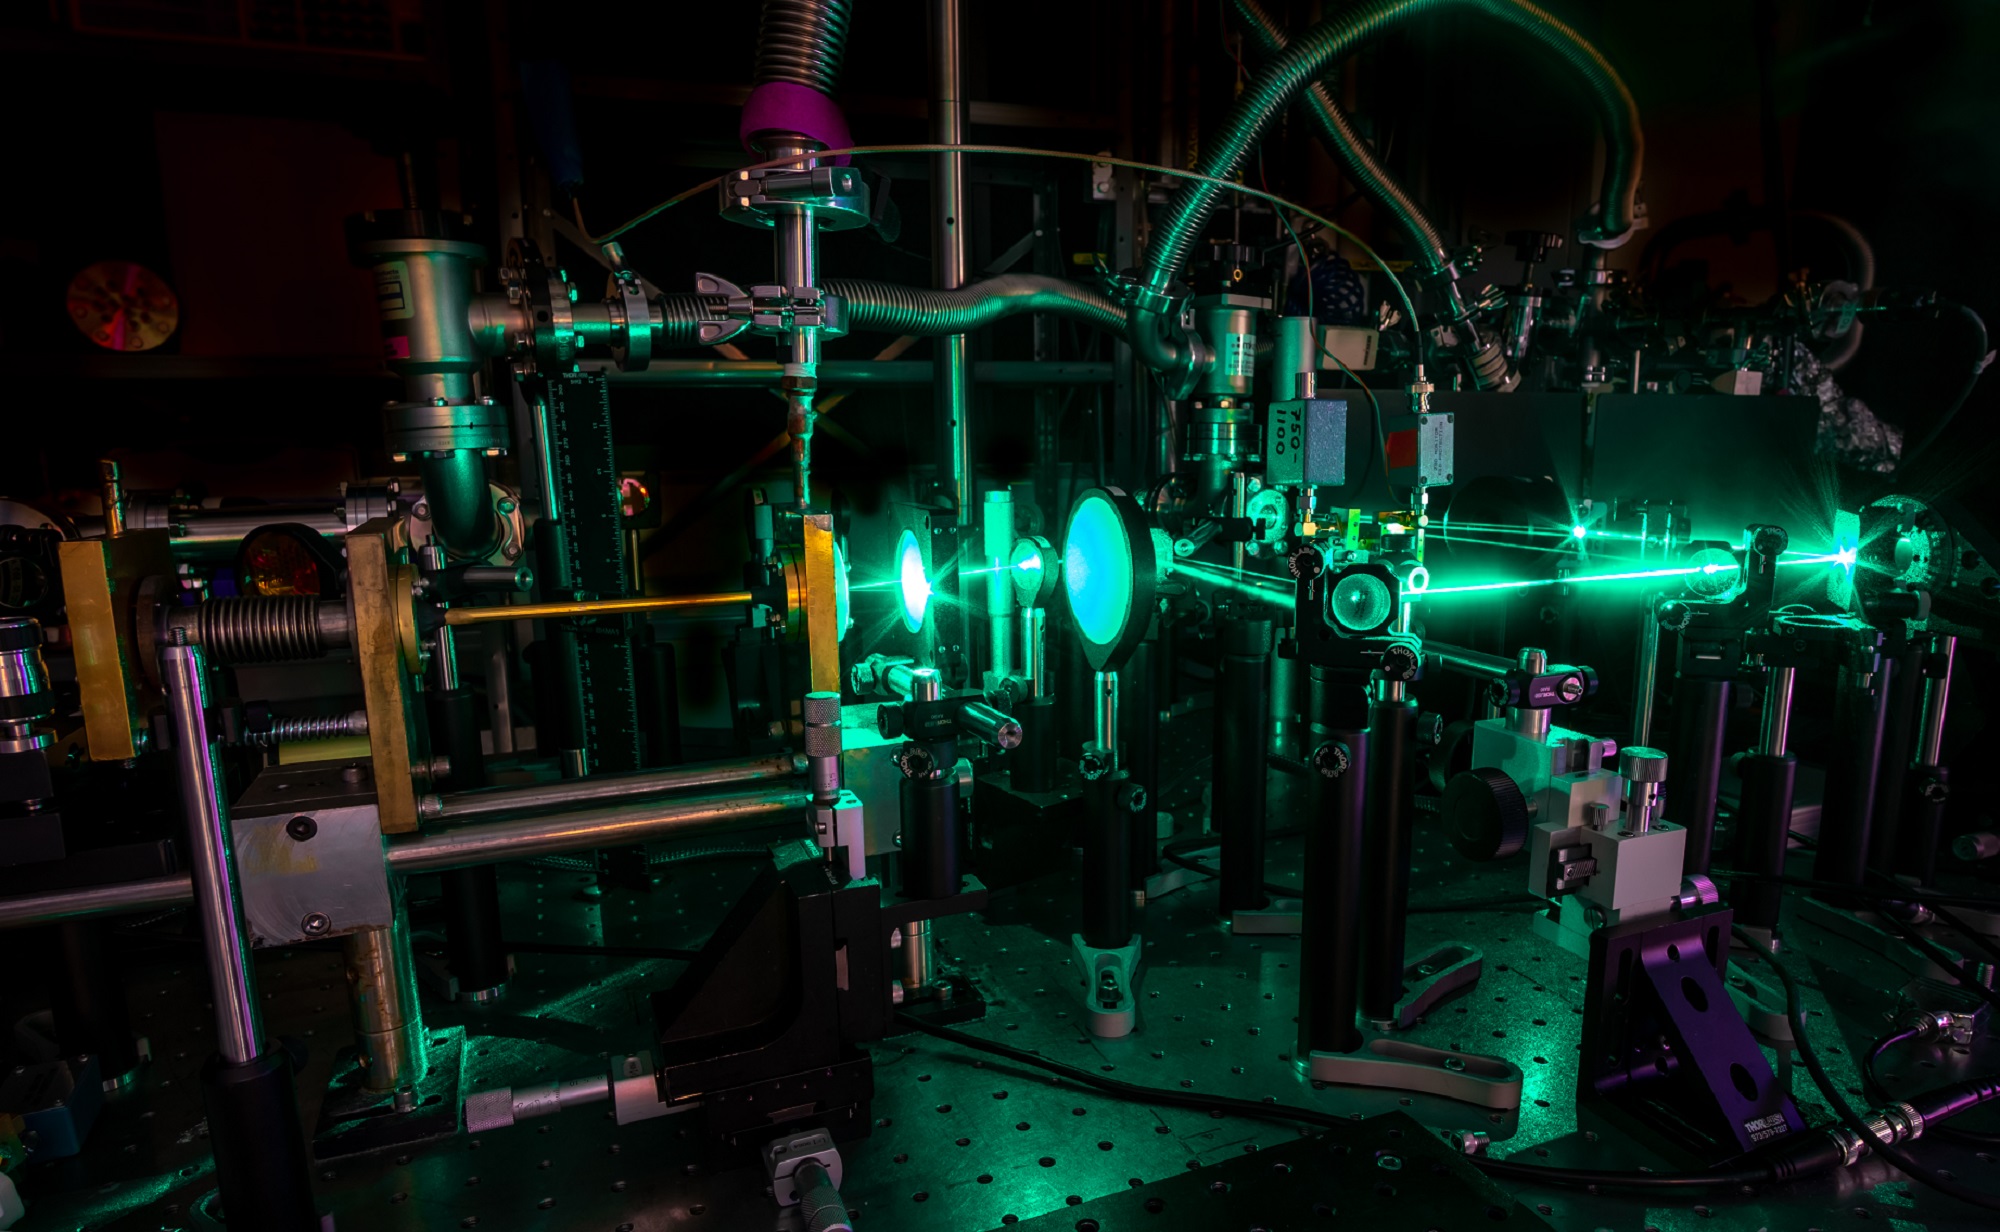 Terahertz laser setup with green lights and silver machinery in a dark room